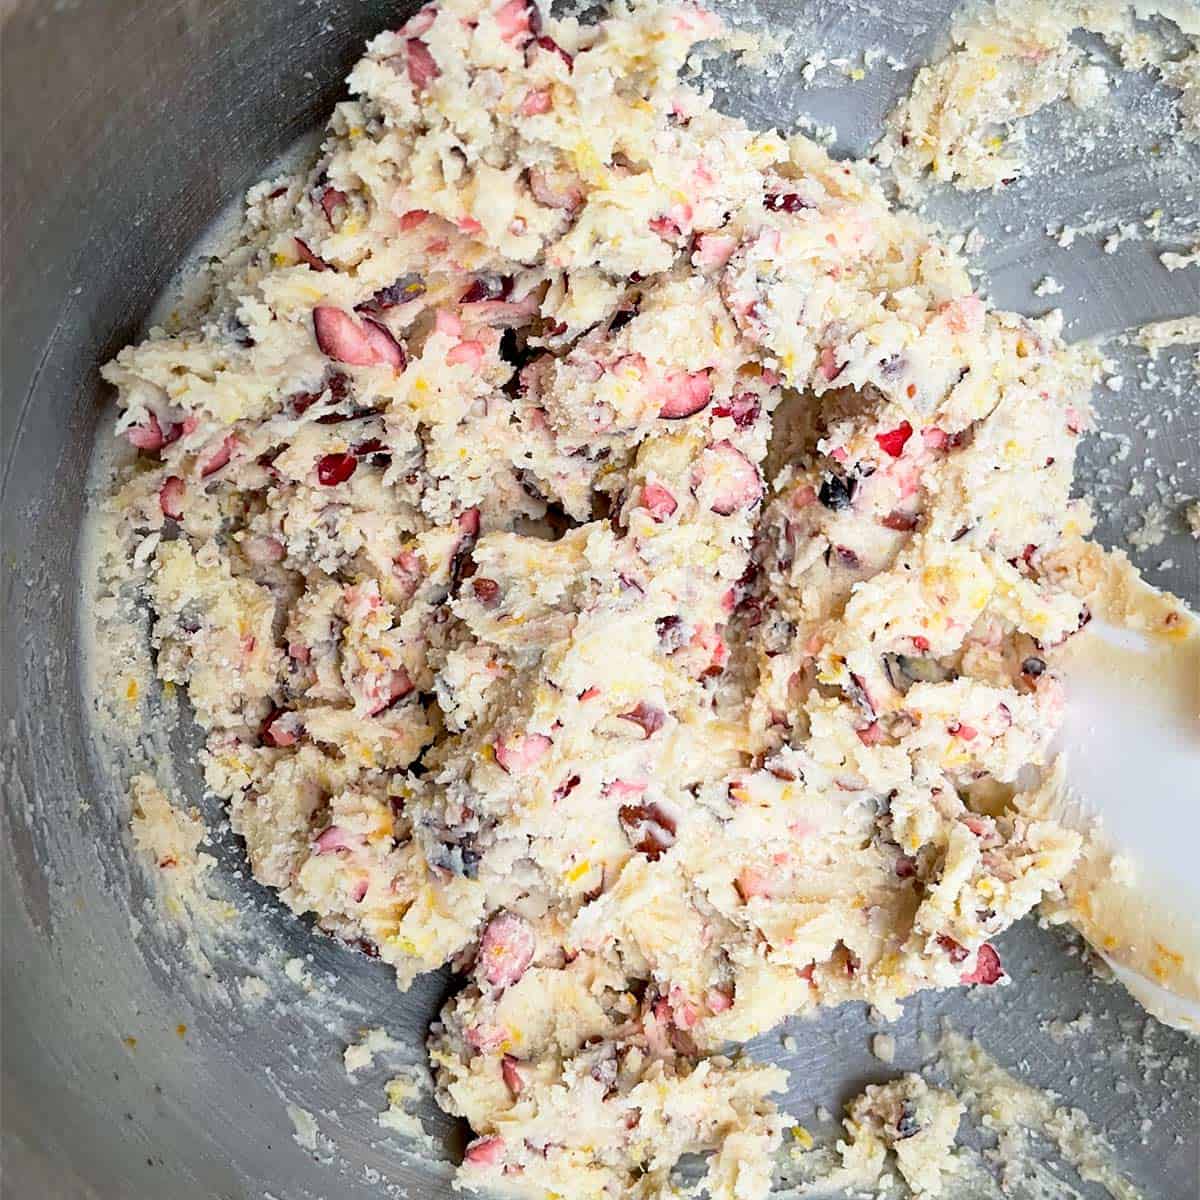 Sortbread dough with cranberry and orange with pecan pieces in a mixer bowl.